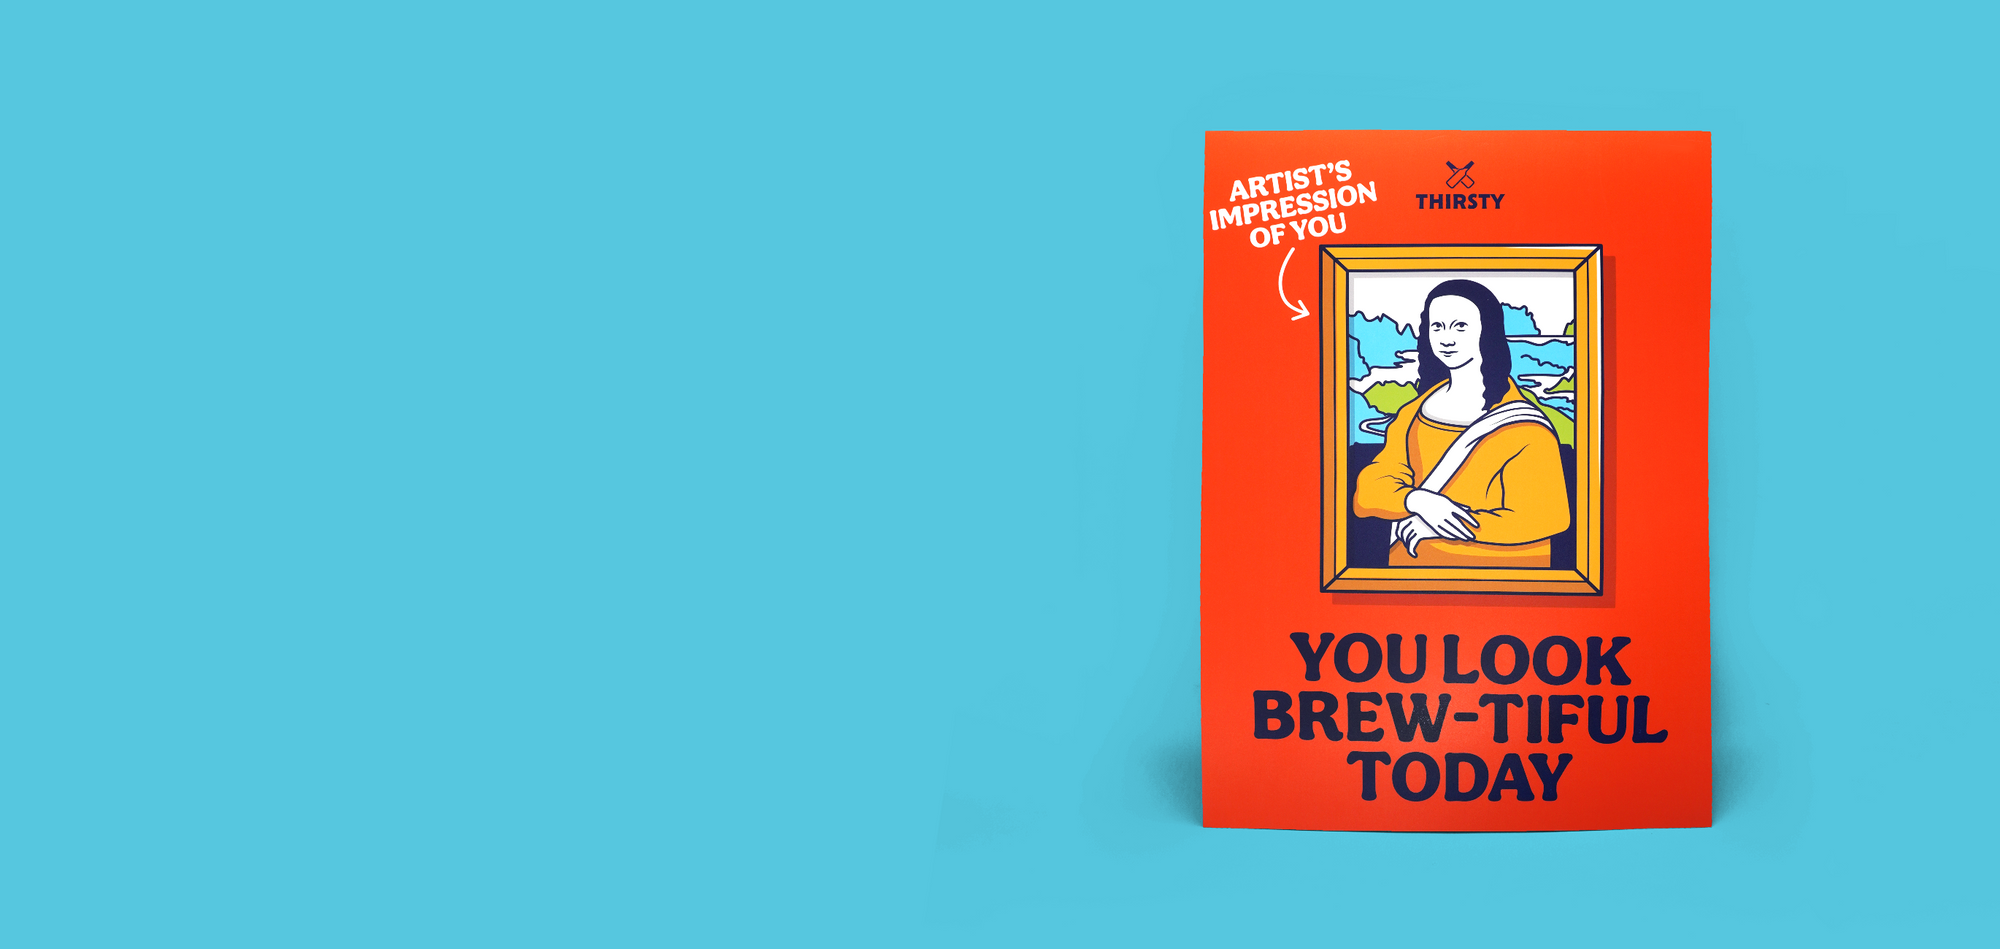 Thirsty “You Look Brew-tiful Today” Poster